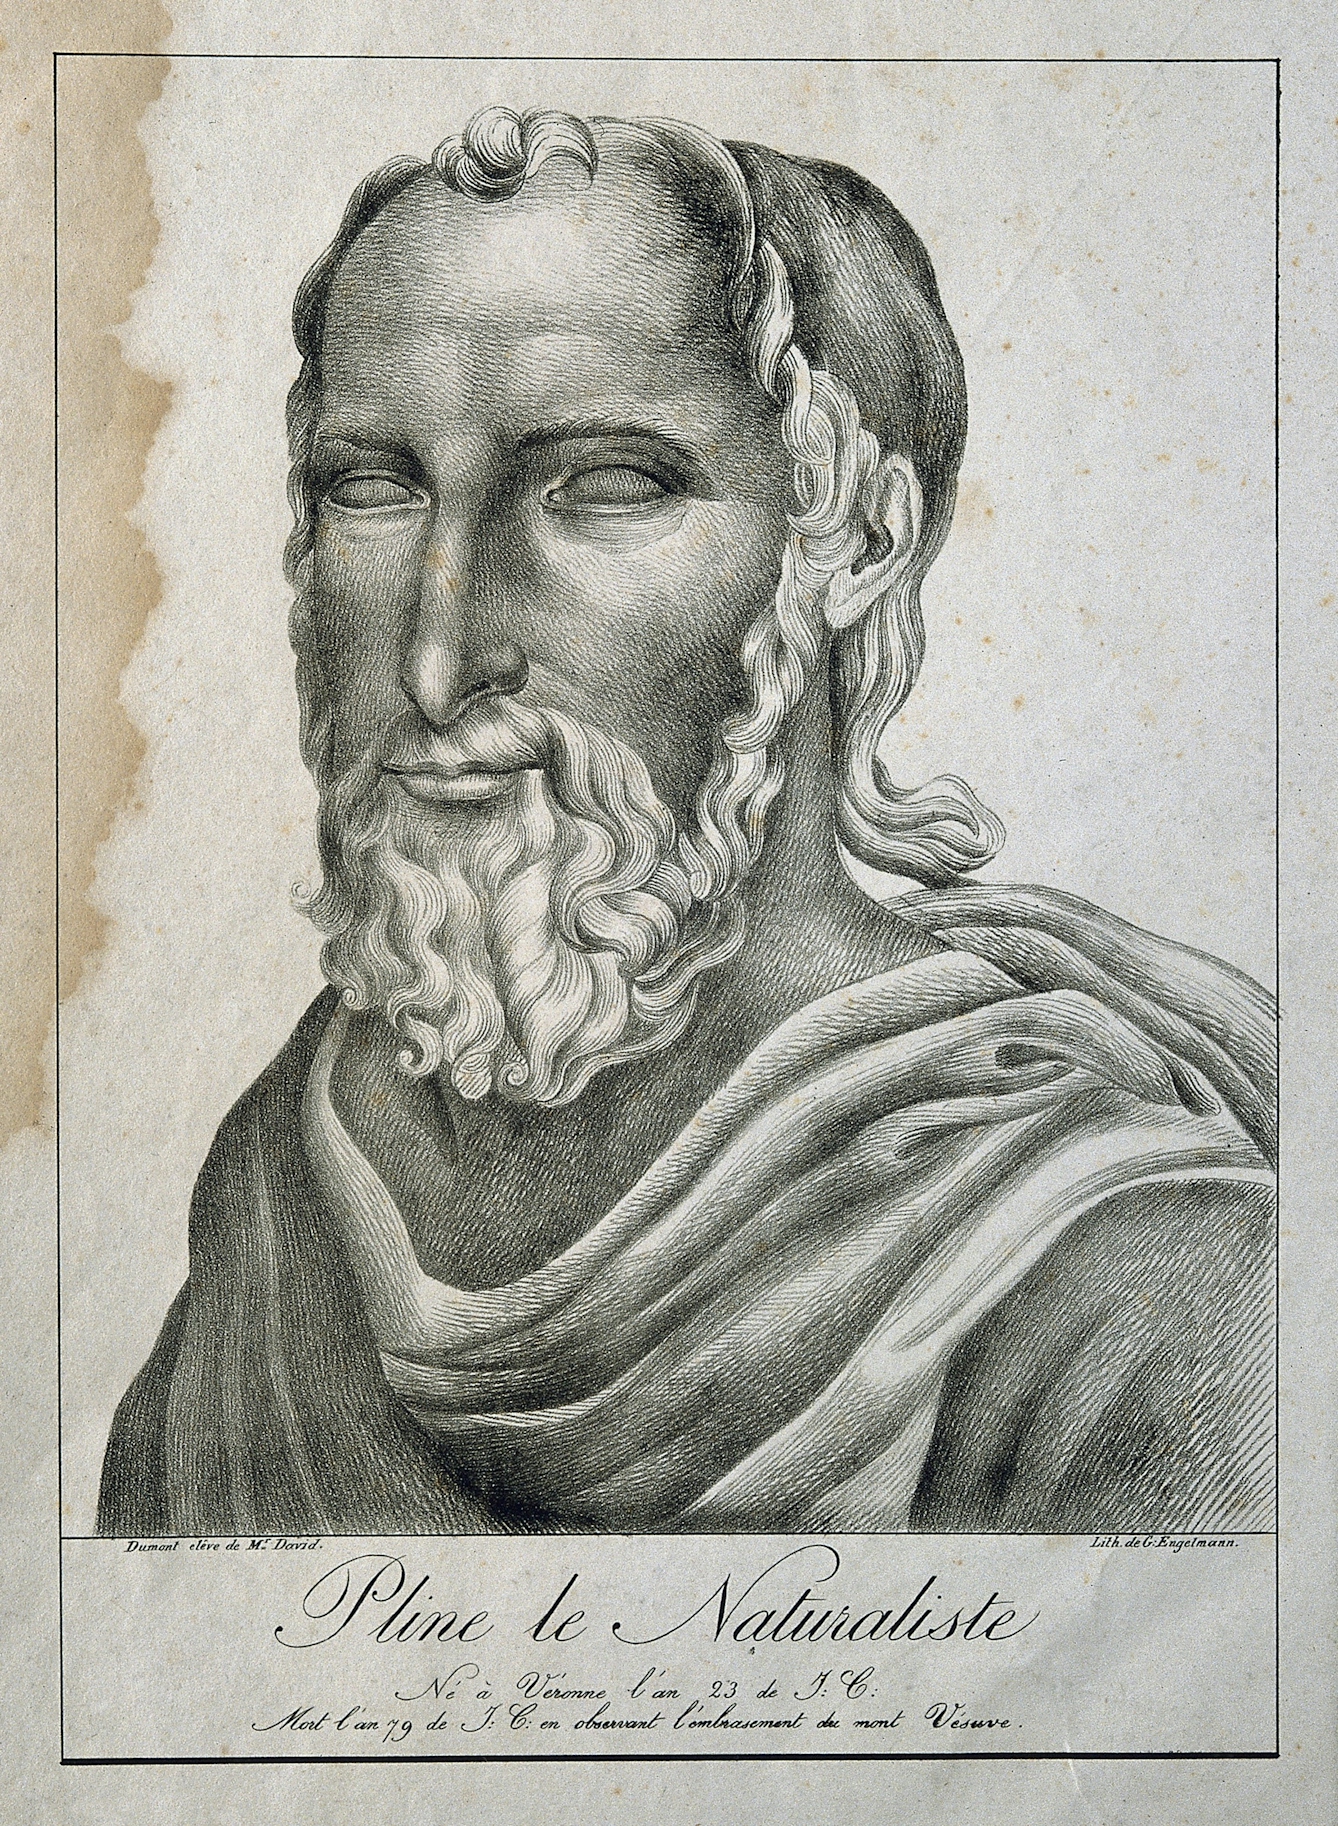 Lithograph of Pliny the Elder